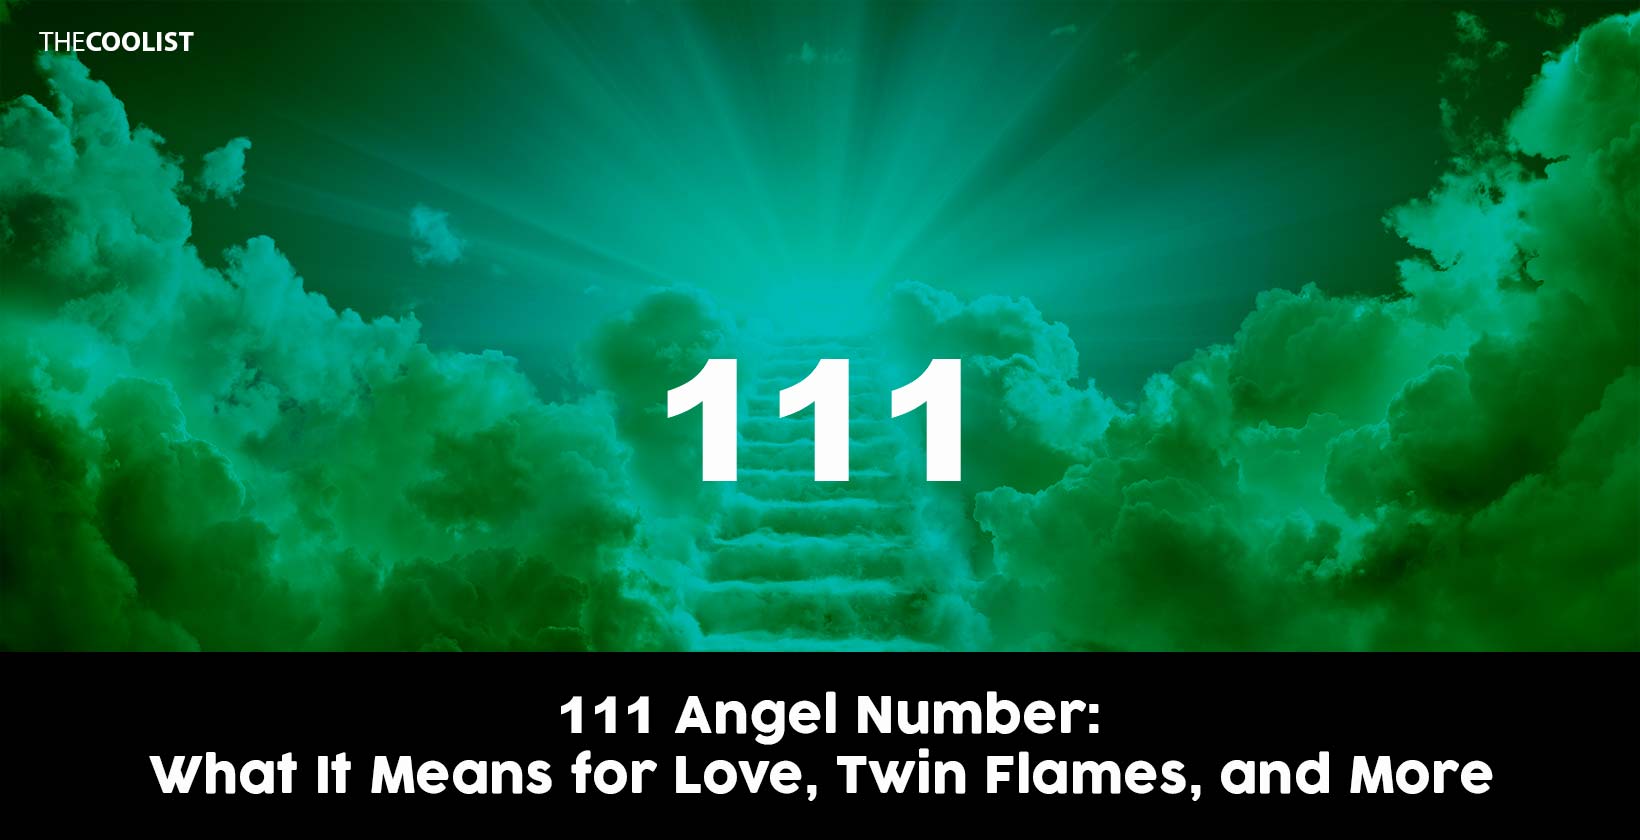 111 Angel Number: What It Means for Love, Twin Flames, and More